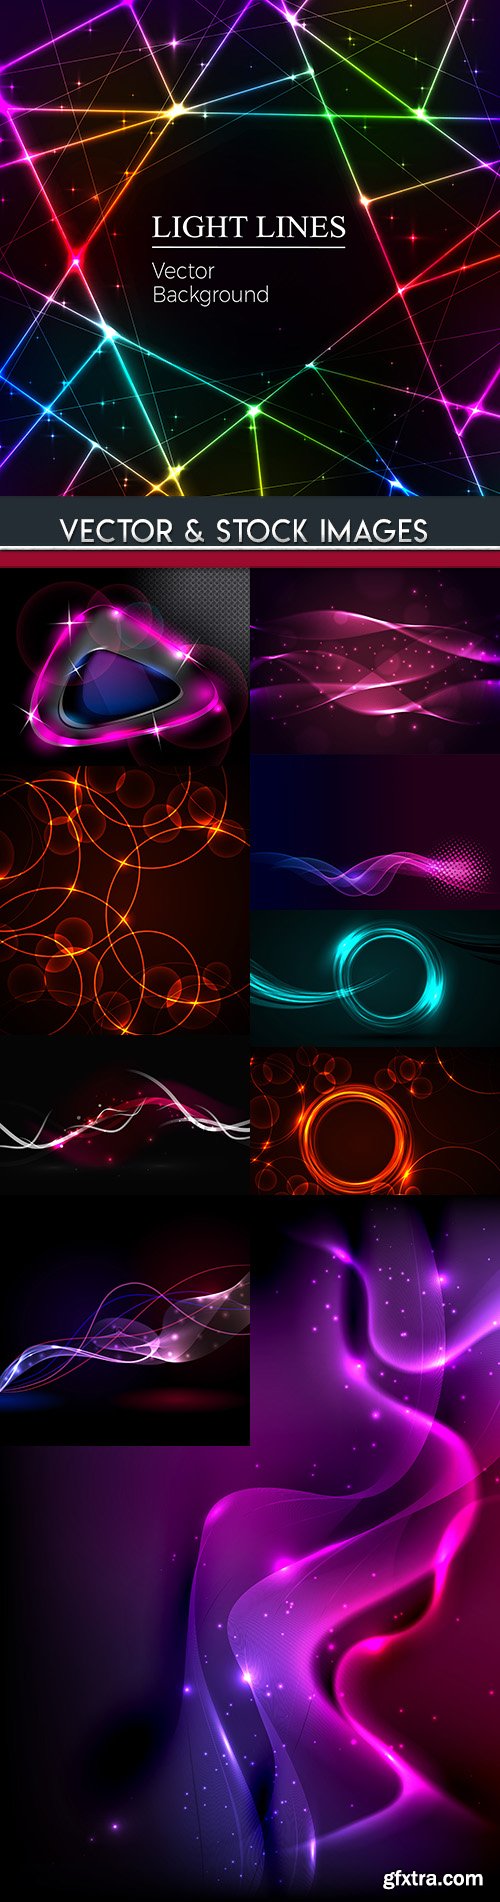 Lighting effect and neon abstract backgrounds